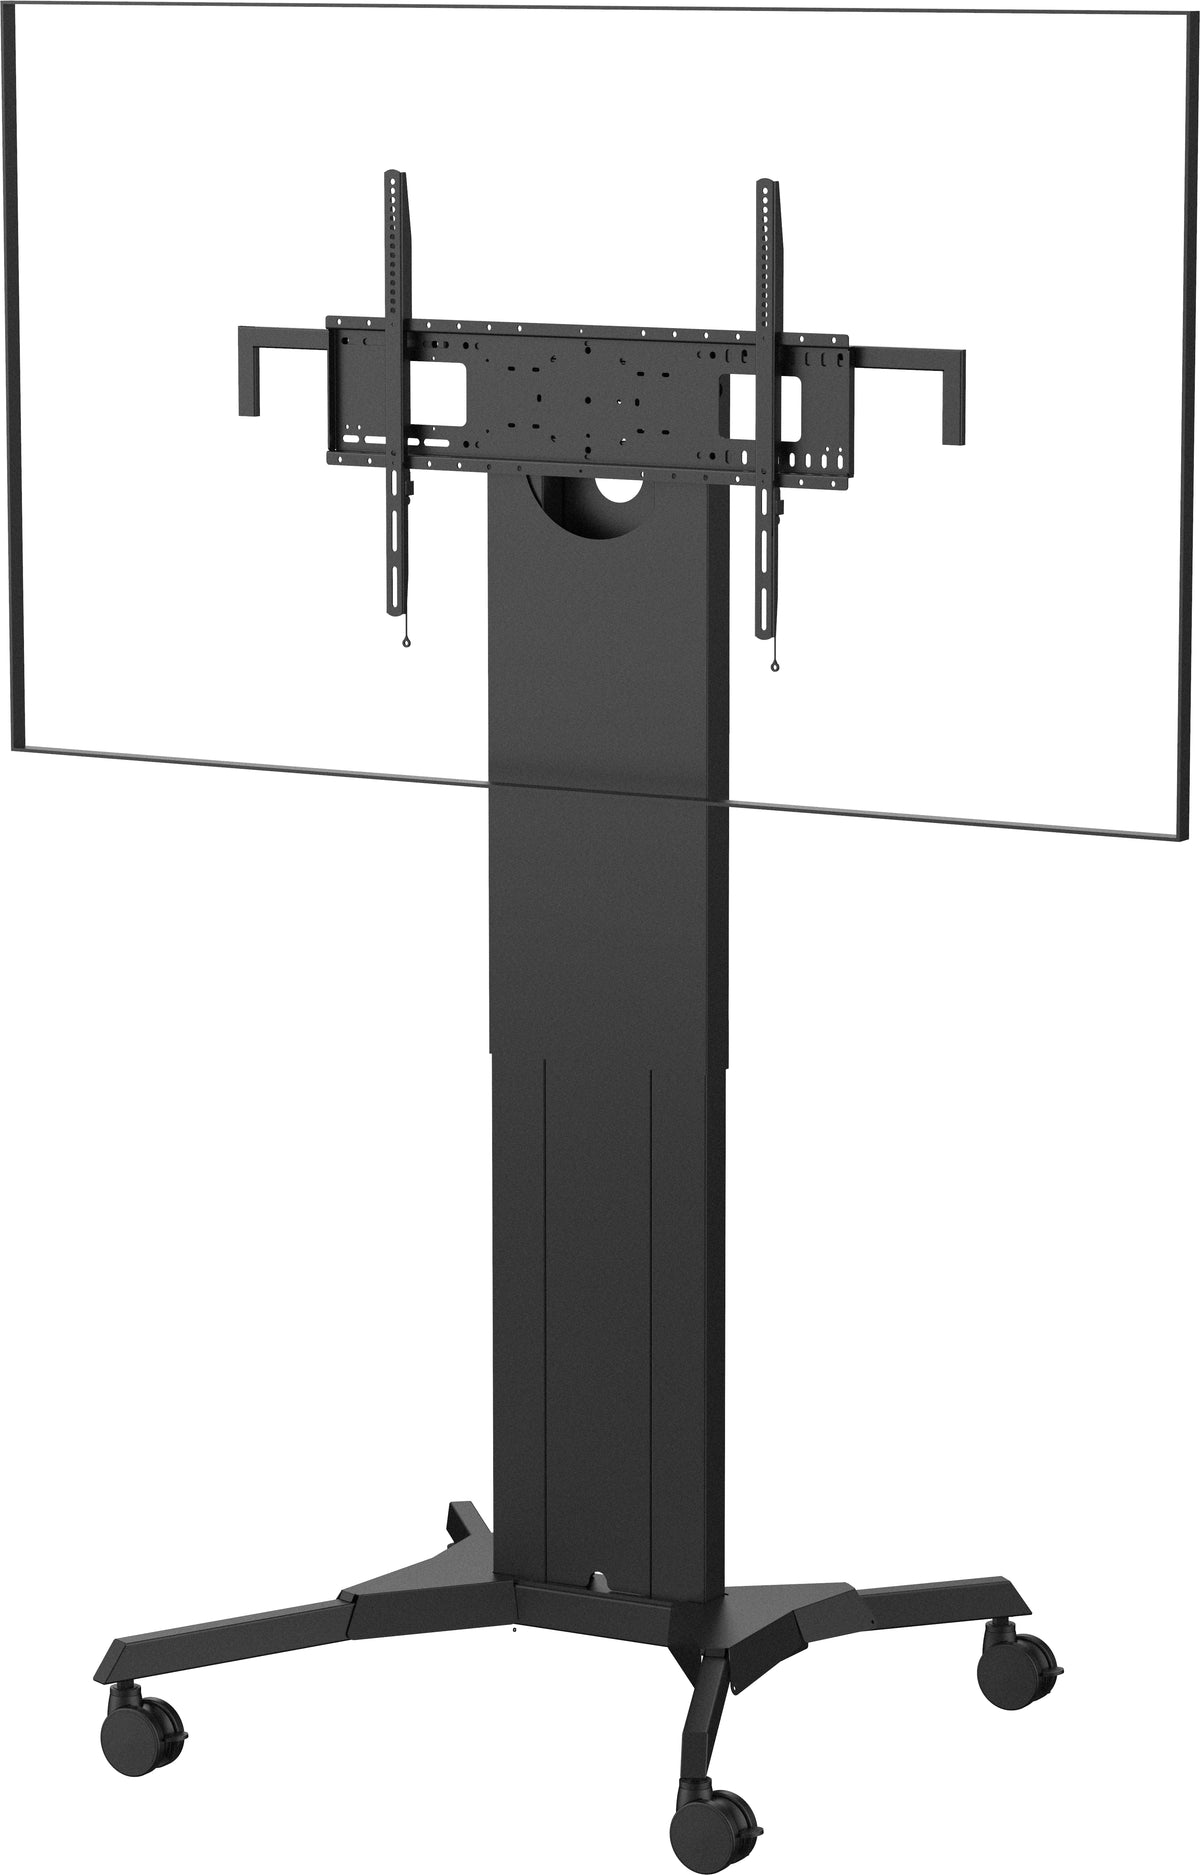 VISION Manual Height Adjustable Display Trolley - LIFETIME WARRANTY - Heavy duty - Fits displays up to 100" with VESA sizes up to 800 x 600 - Premium 4" wheels for smooth movement - Removeable wheels for non-portable variation - Removeable rear legs